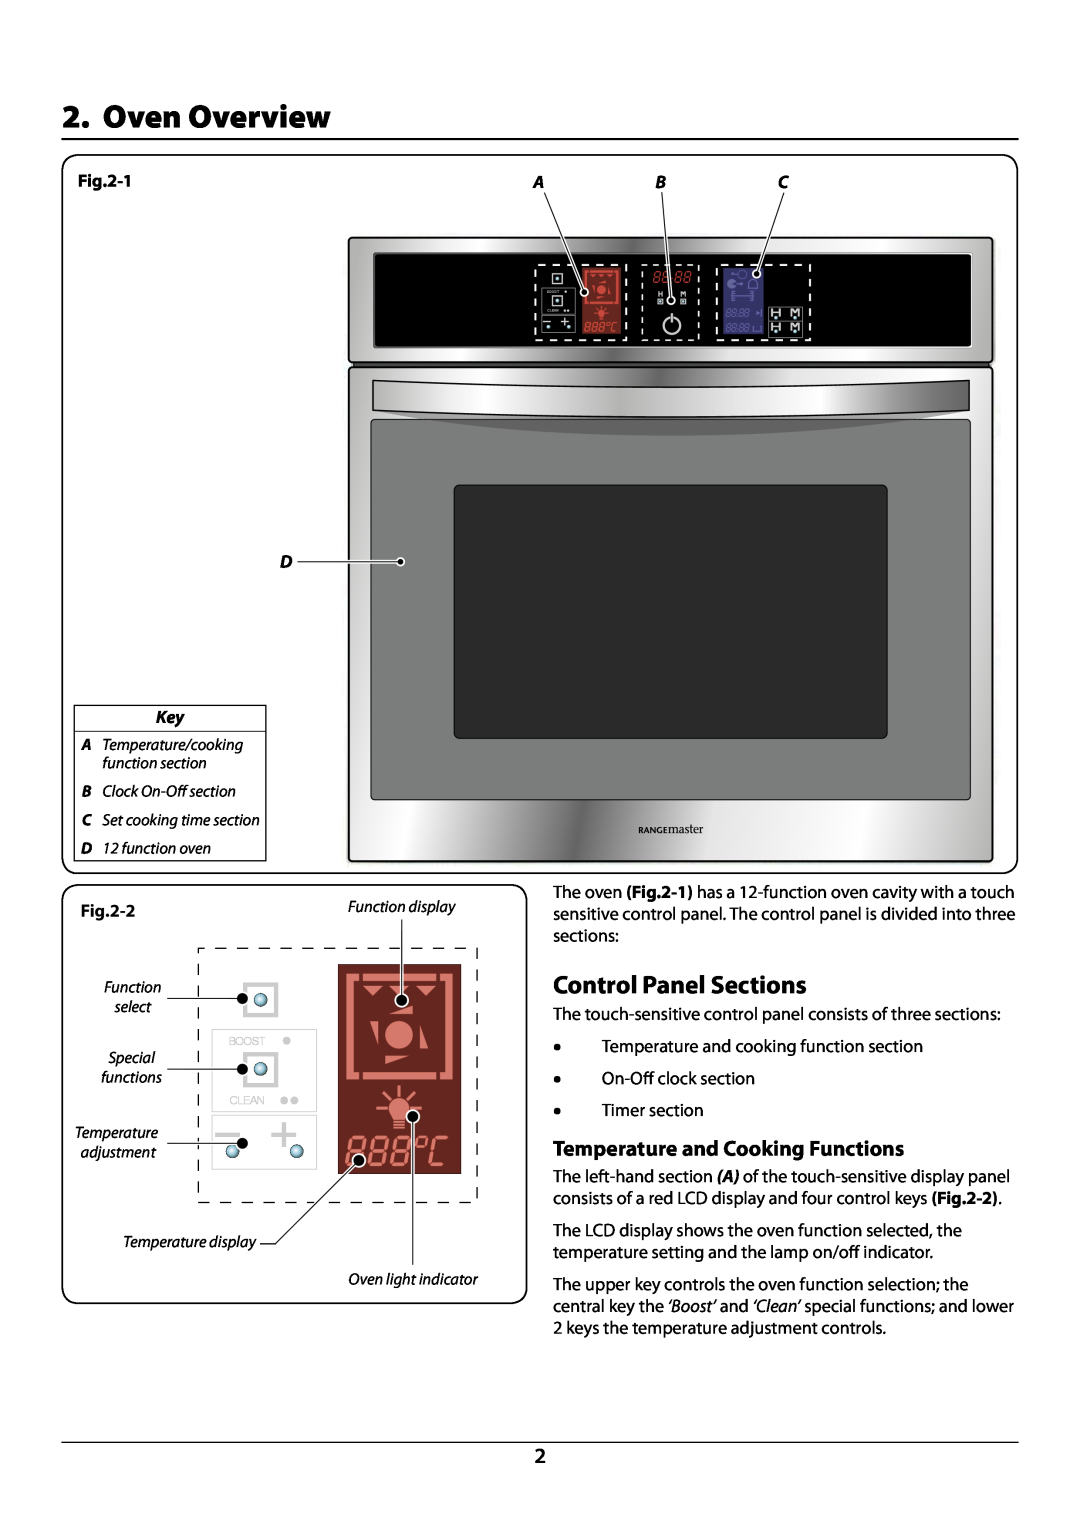 Rangemaster R6012 manual Oven Overview, Control Panel Sections, Temperature and Cooking Functions 